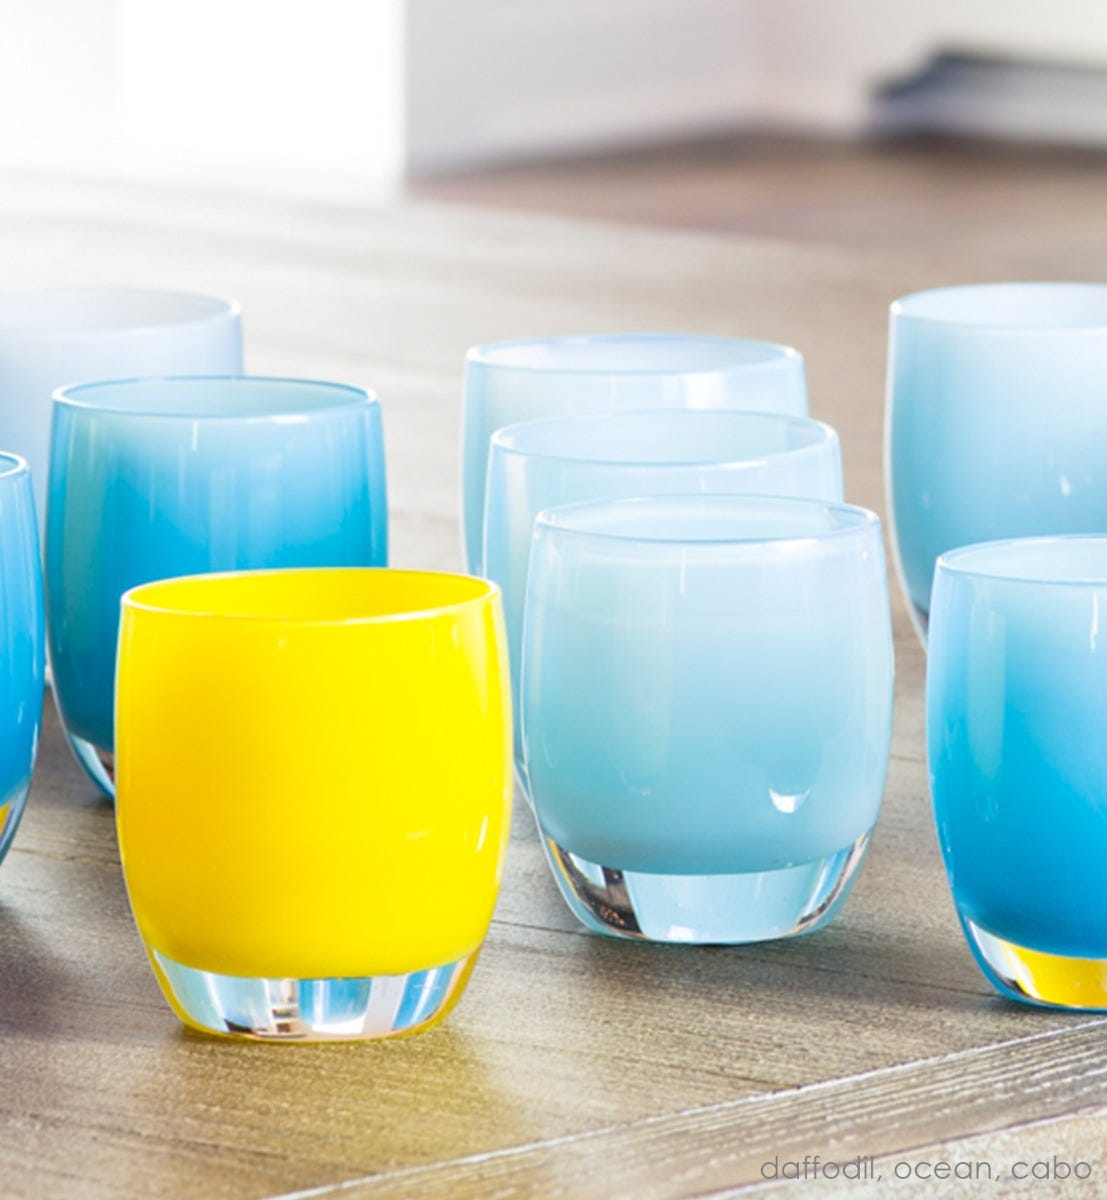 Keep Cool | Light Blue Hand-Blown Glass Candle Holder | glassybaby